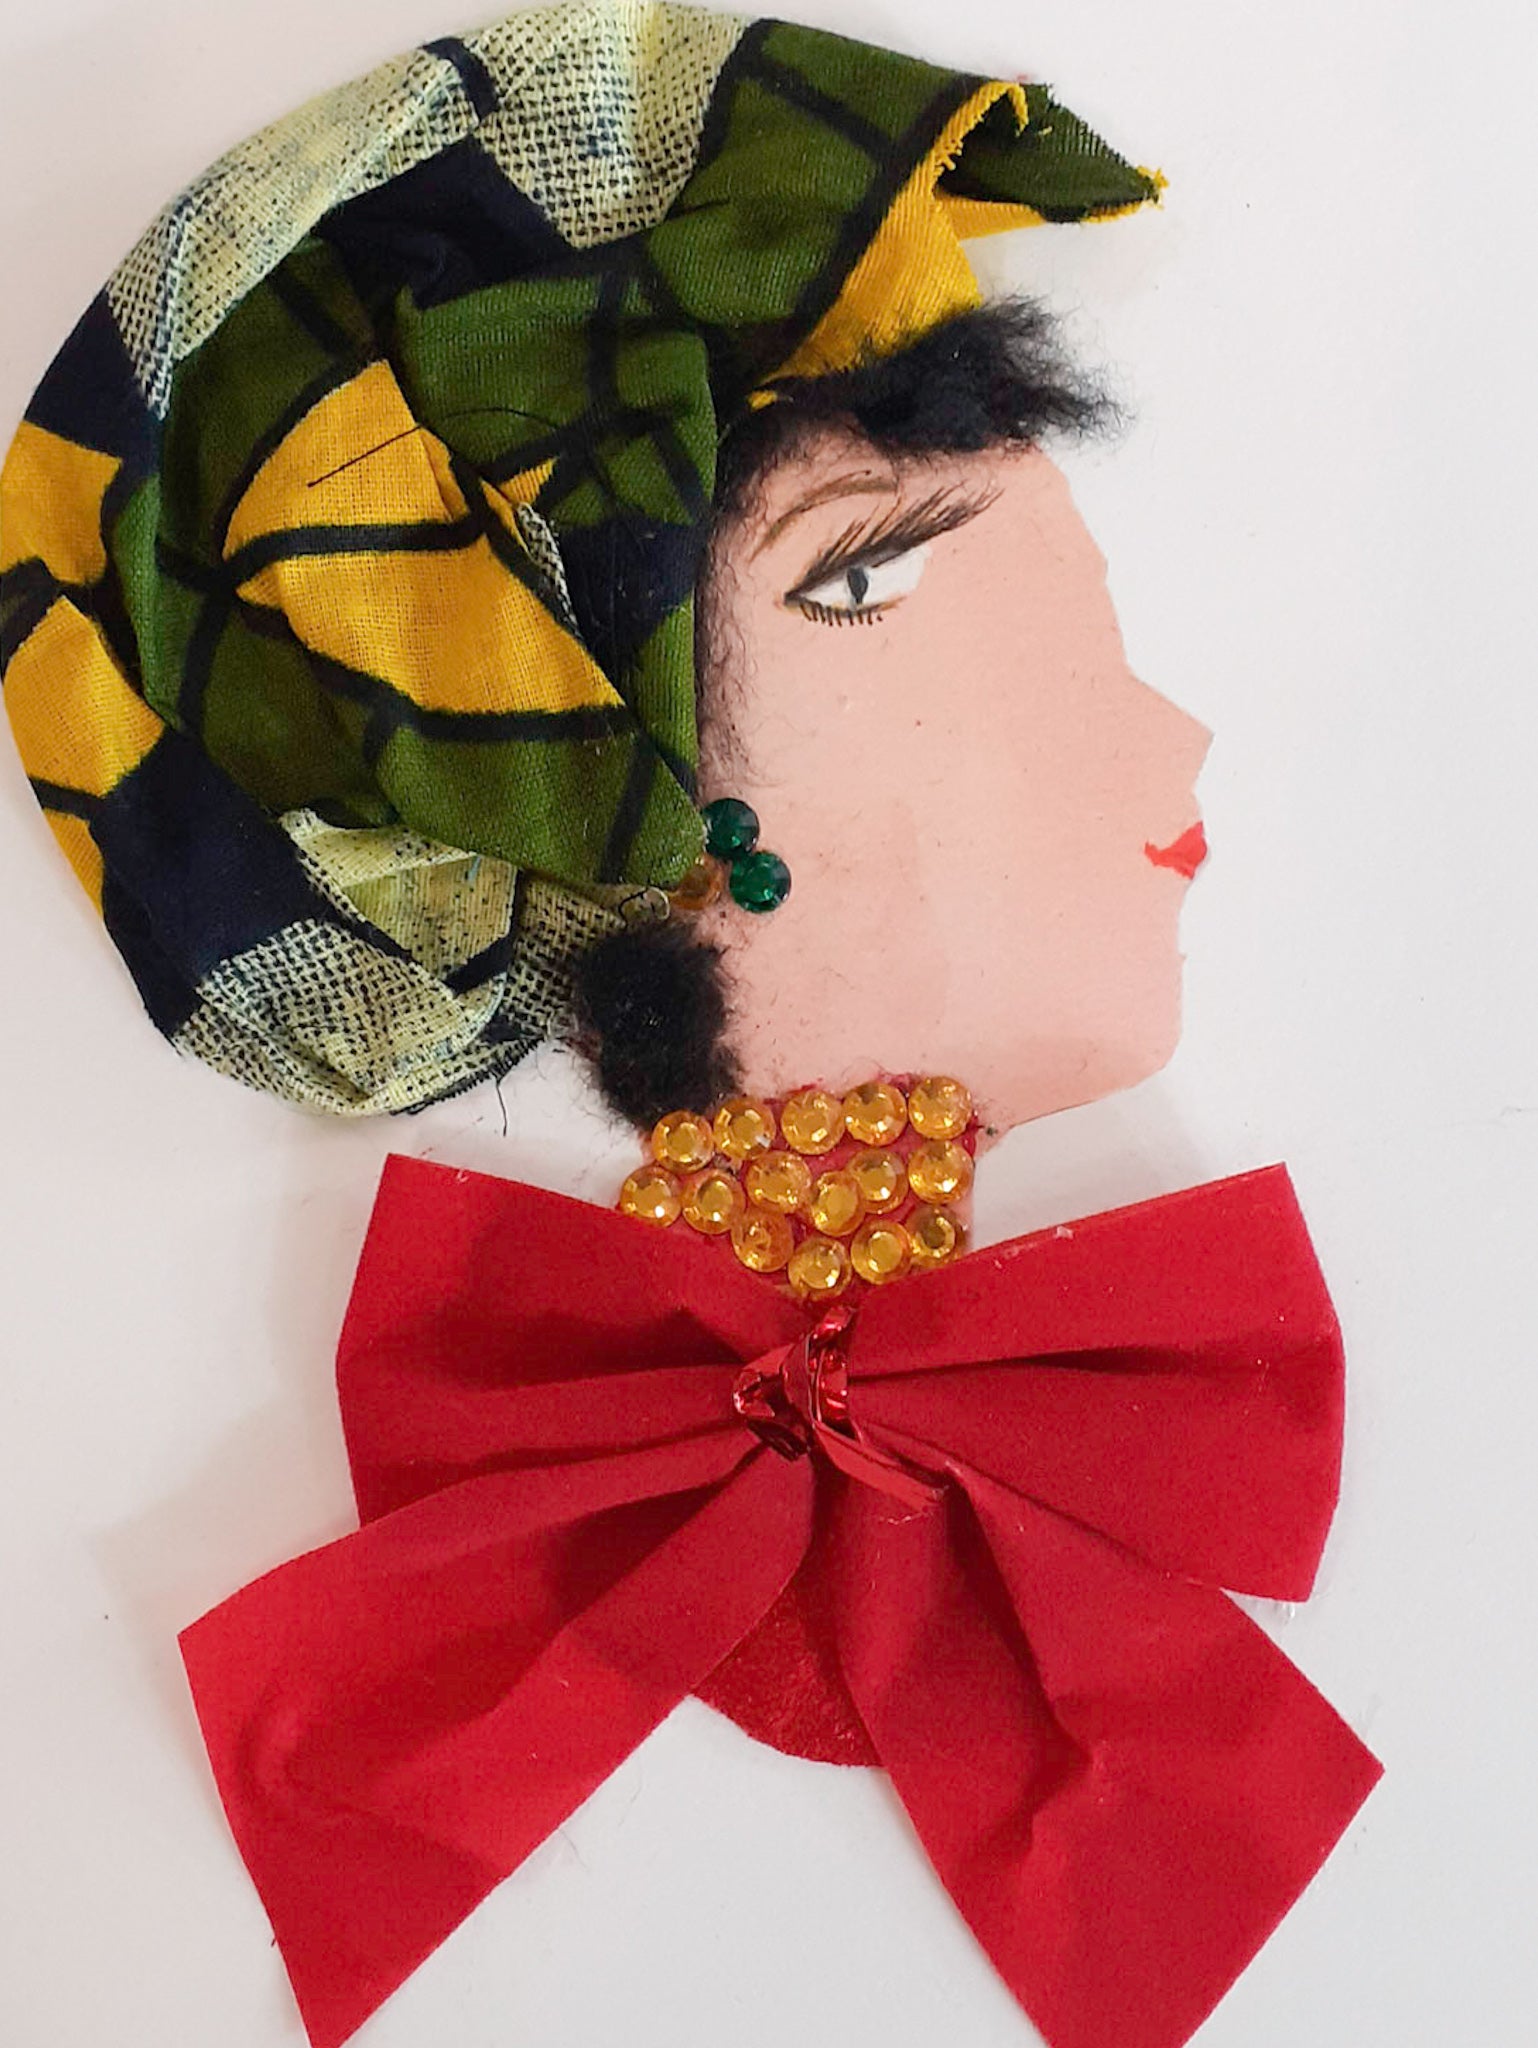 This card is of a woman named Angelina. Angelina wears a red top which is an oversized red bow. Her necklace is made of small yellow jewels, and she wears a headscarf with green and yellow geometric shapes on it. 